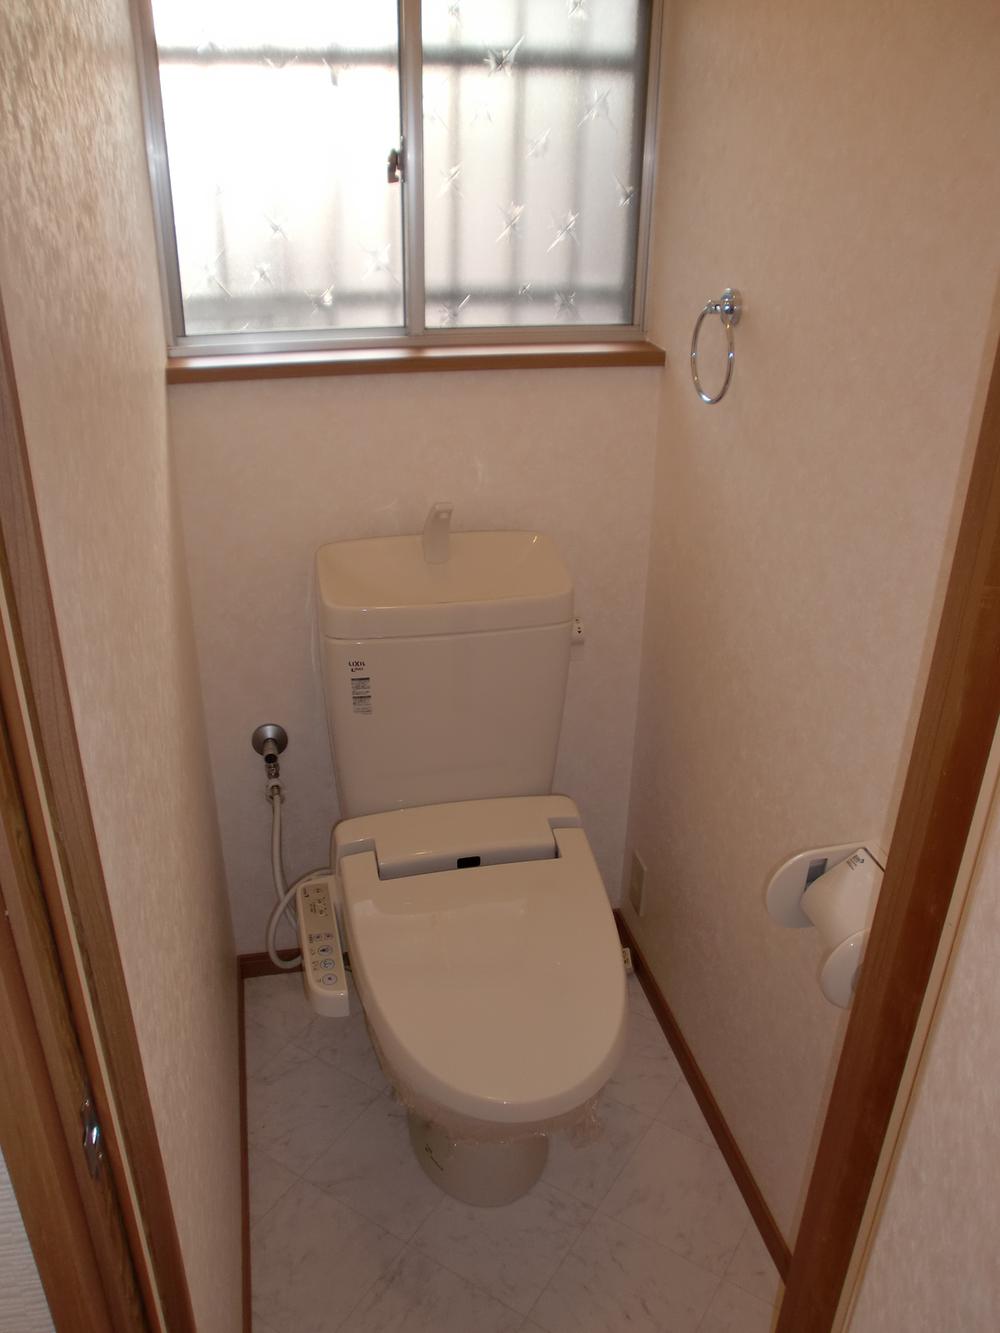 Toilet. Toilet is settled also had made